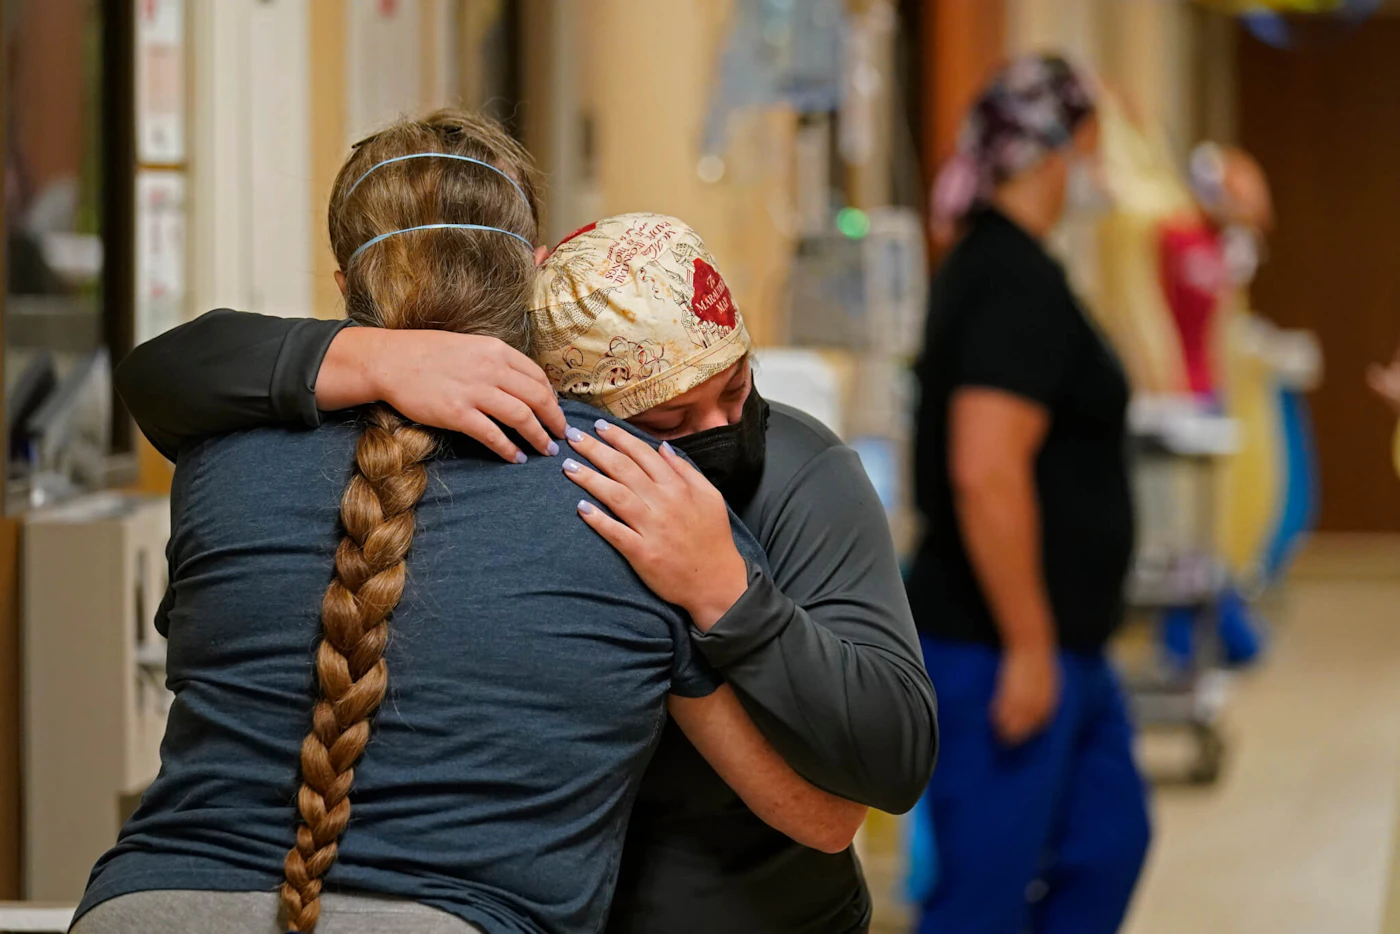 ICU nurse Melinda Hunt, facing, hugs the sister of a COVID-19 patient who she had been caring for after the patient died in 2021 in Shreveport, La. (AP Photo/Gerald Herbert, File)